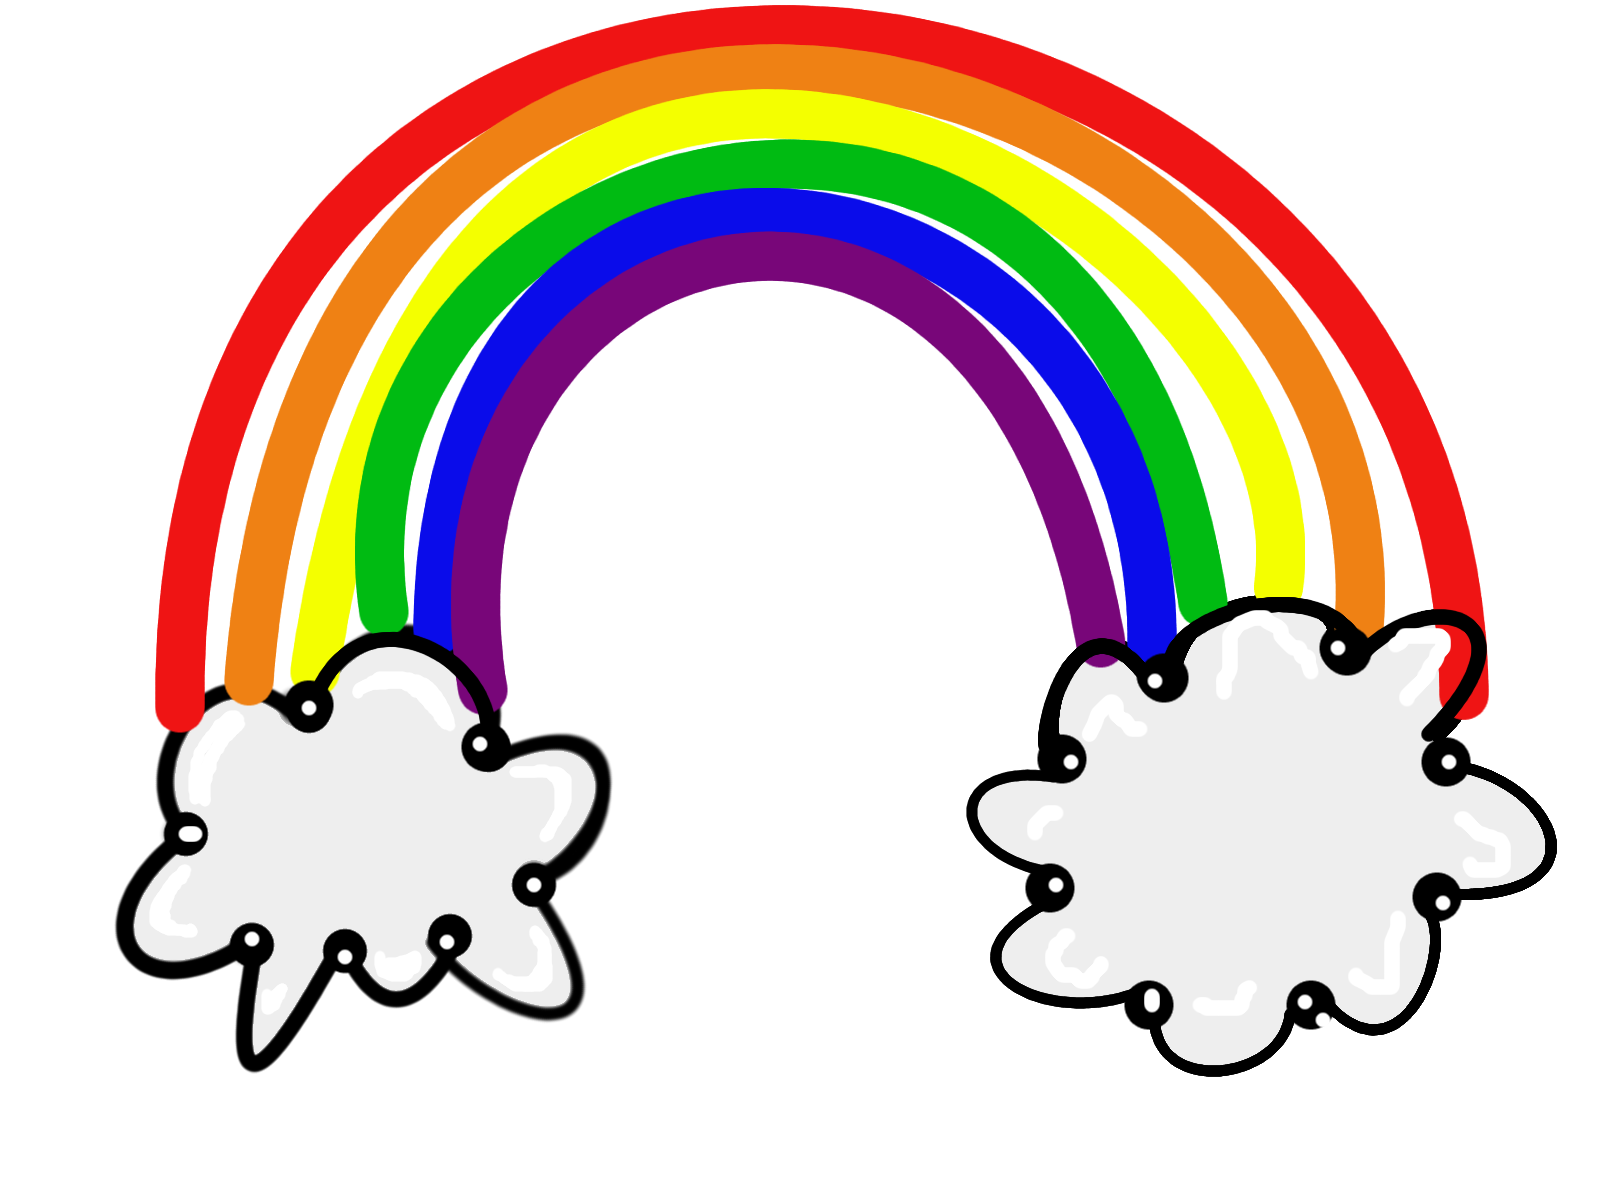 pick up toys clipart for kids - Clip Art Rainbow